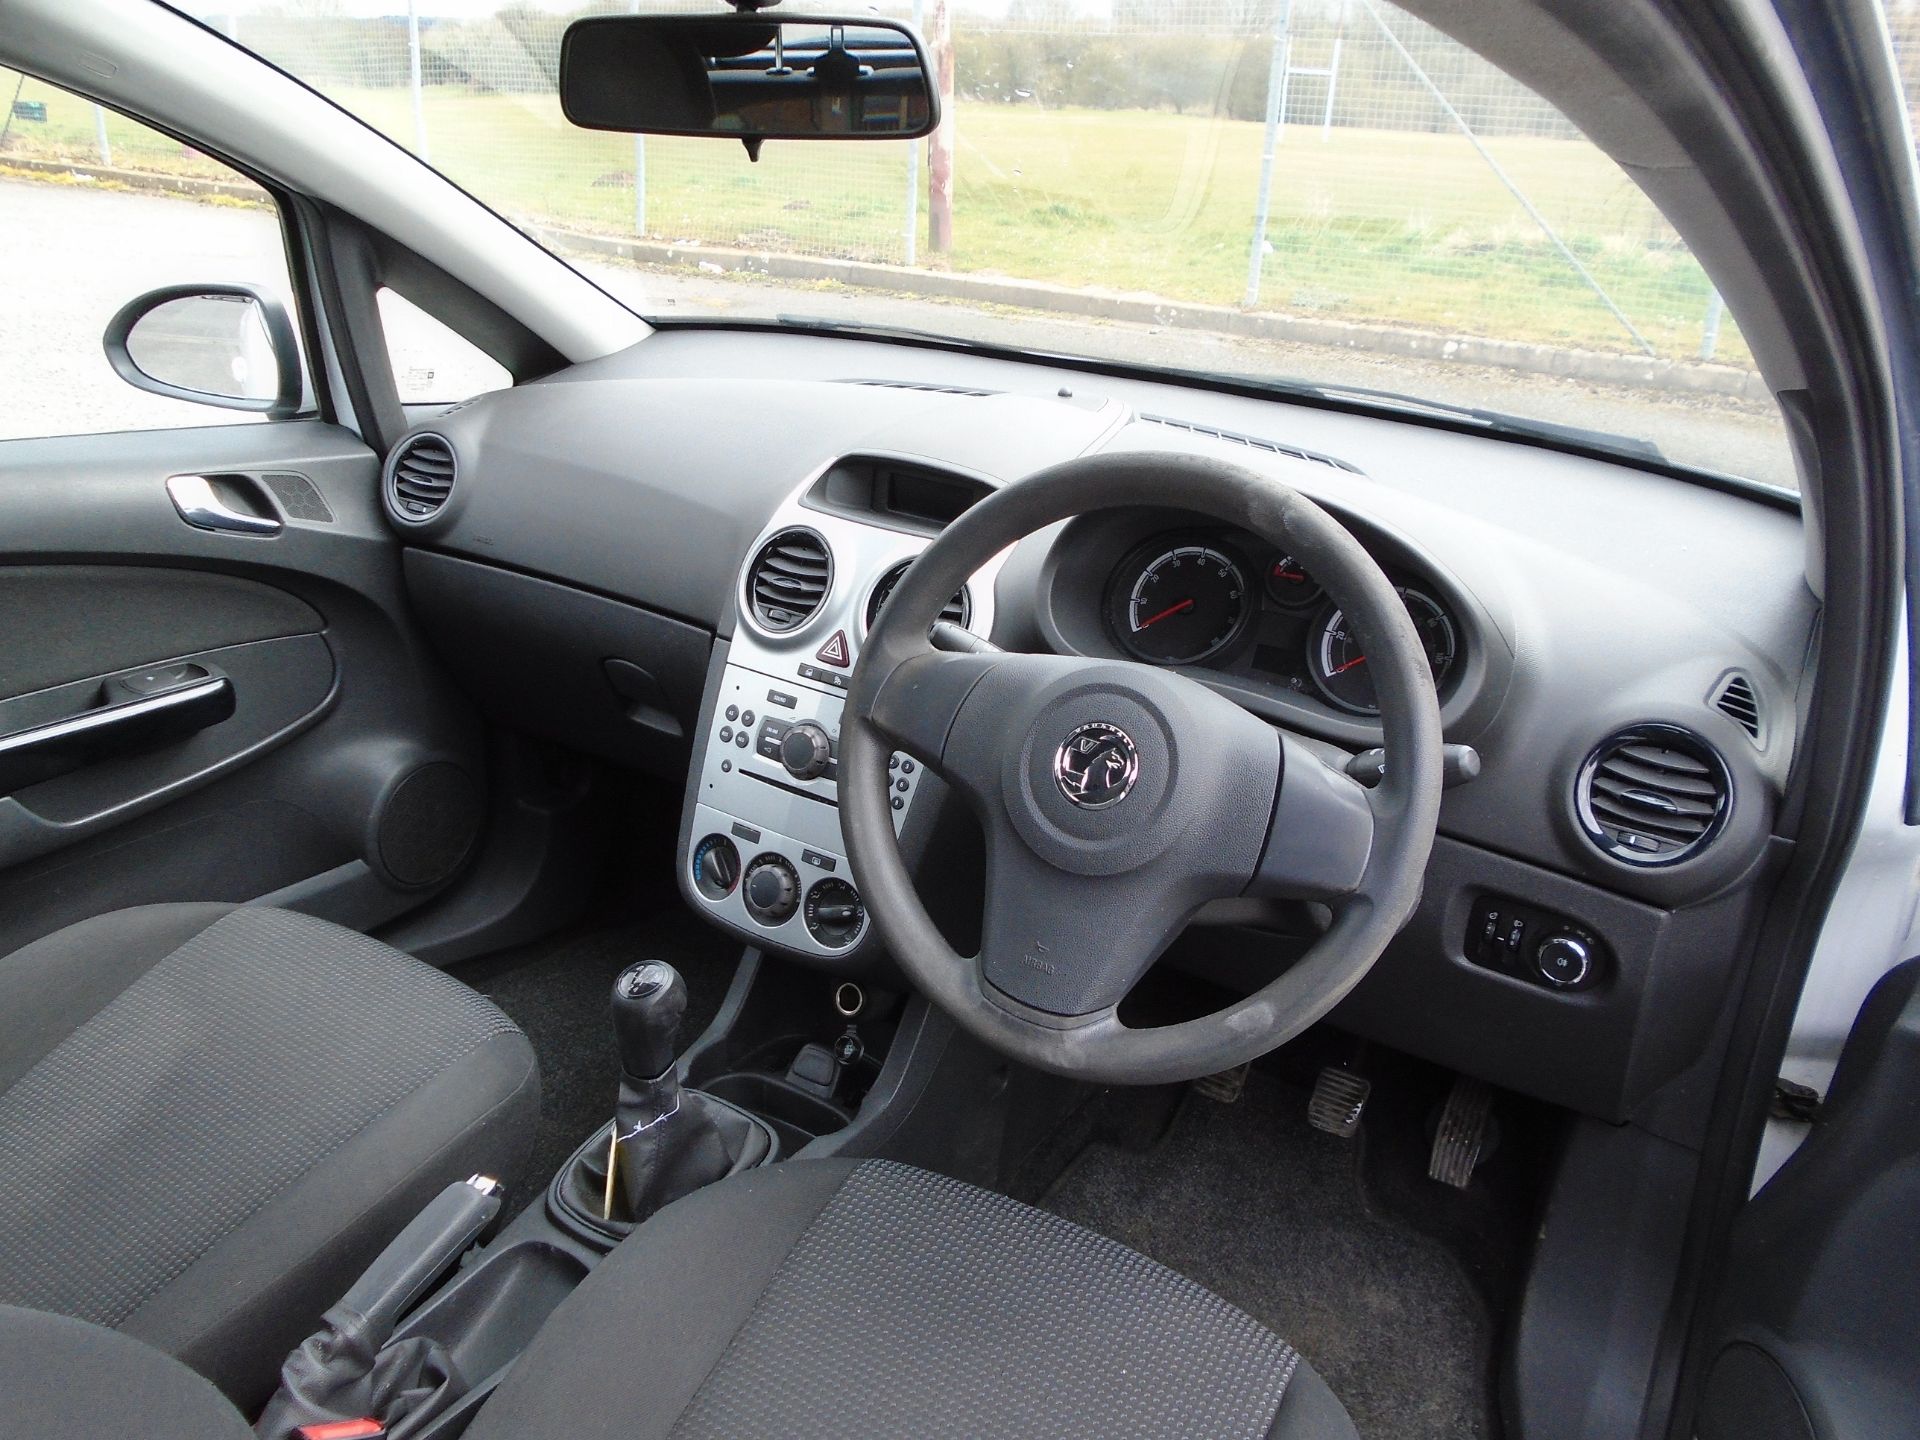 2011/61 REG VAUXHALL CORSA S ECOFLEX 998CC PETROL WHITE 3DR HATCHBACK, SHOWING 3 FORMER KEEPERS - Image 7 of 8